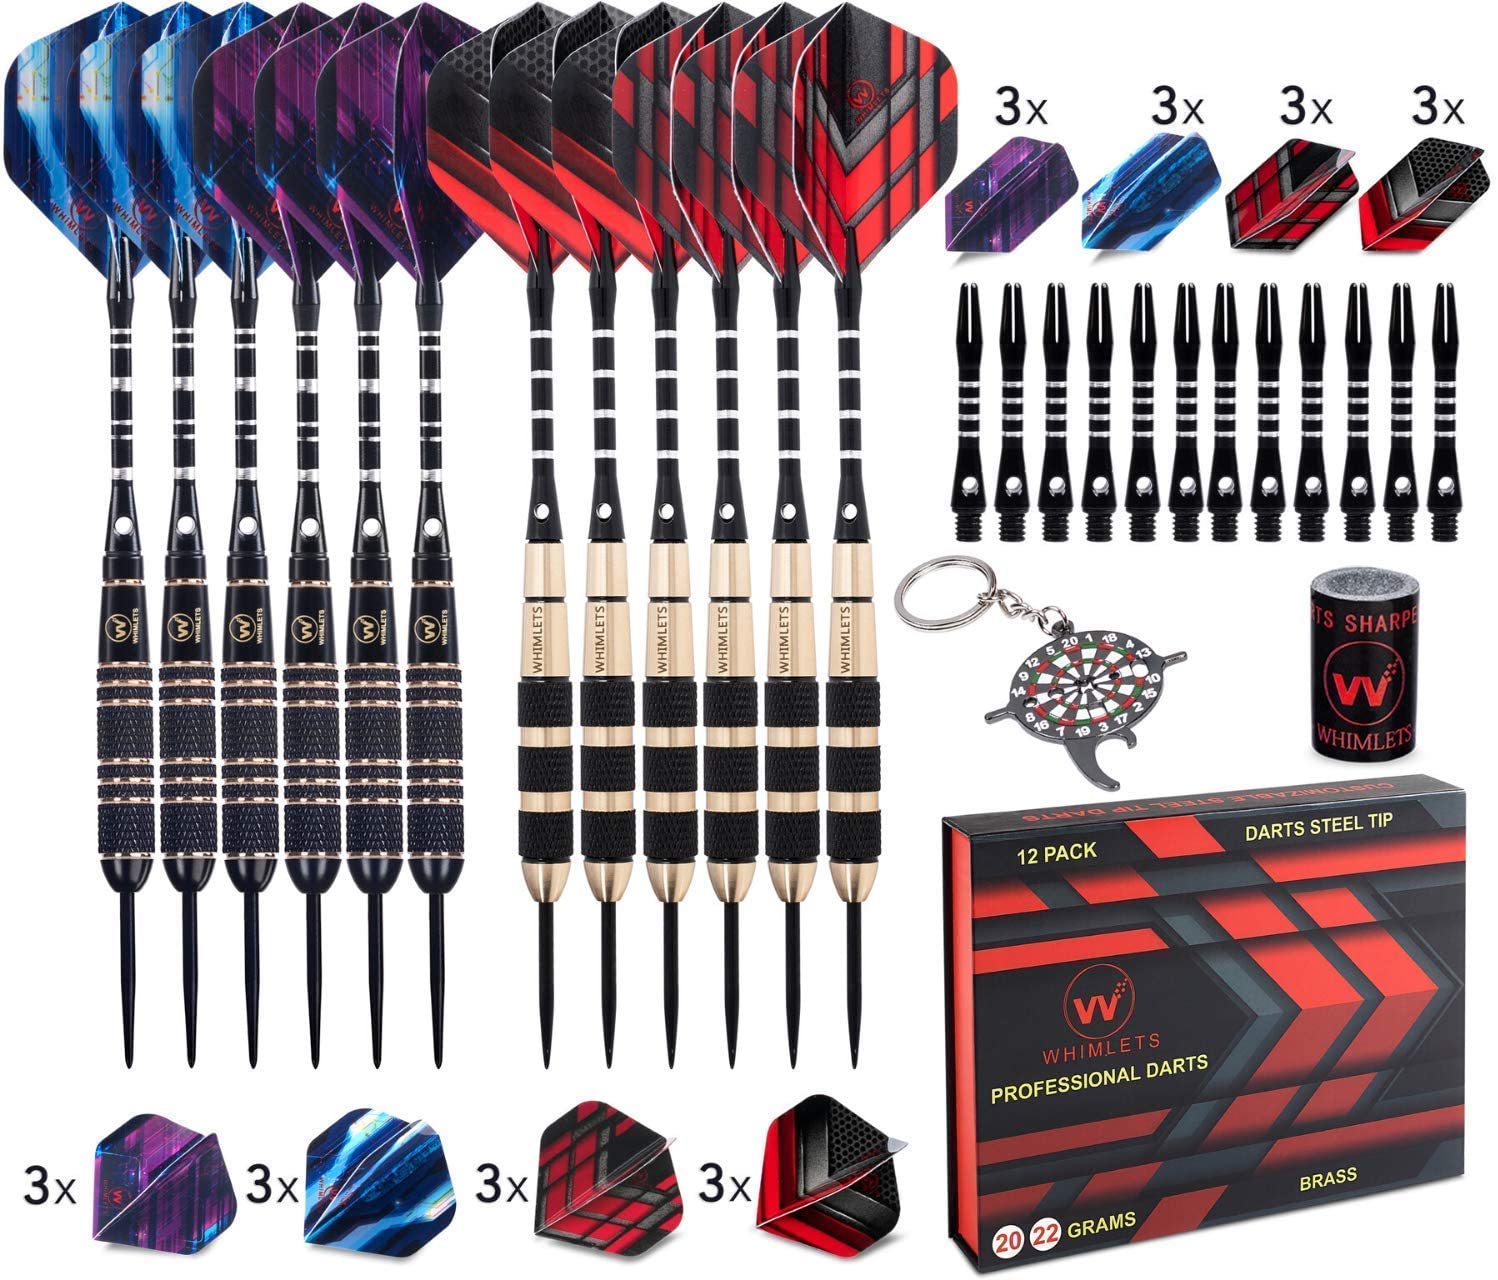 Whimlets Steel Tip Darts Set - Professional Darts Steel Tip for Dartboard with Extra Aluminum Shafts, O-Rings, Flights + Dart Tool and Sharpener + Gift Case 